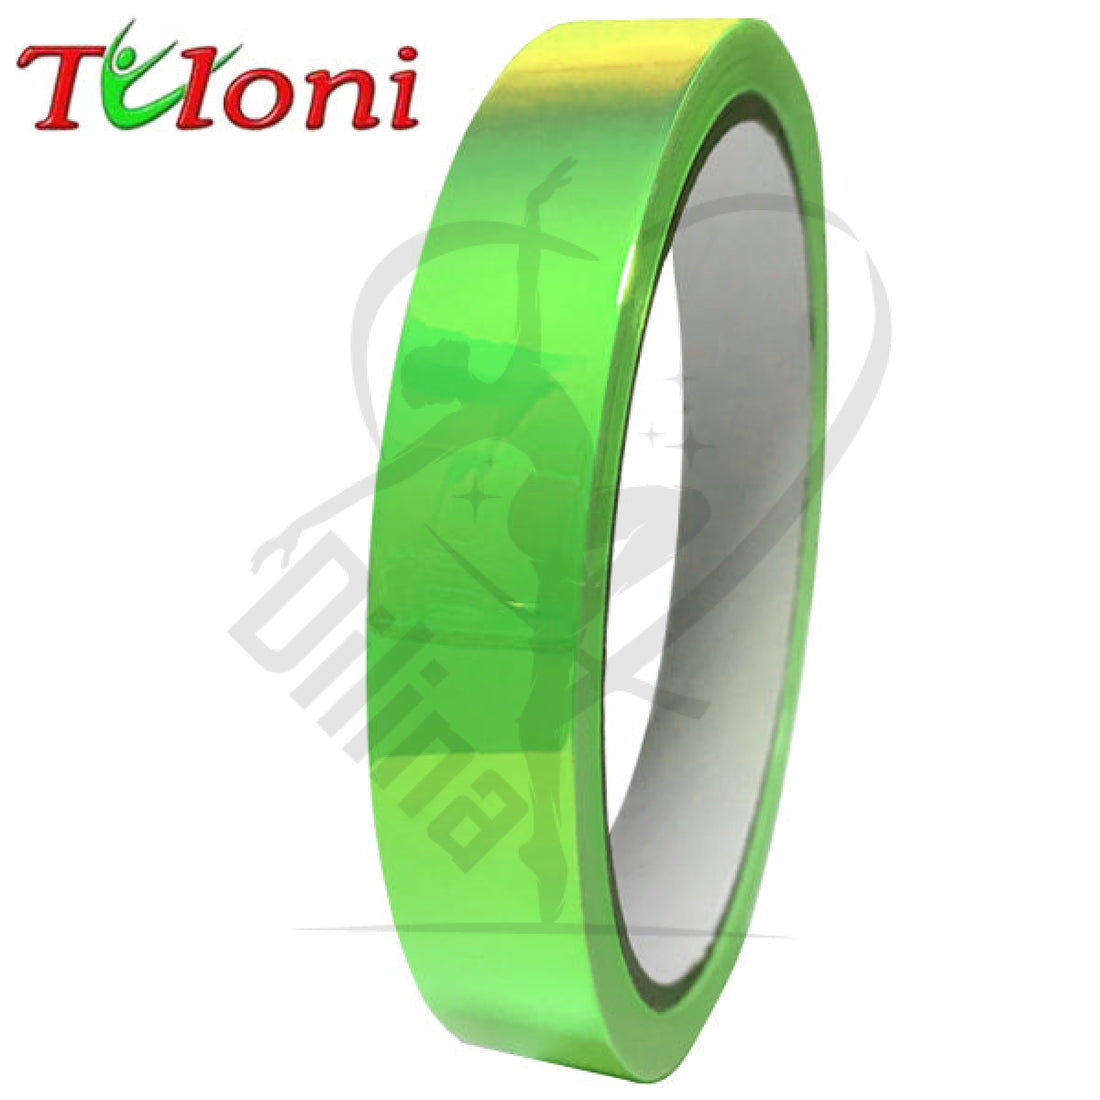 Tuloni Holographic Tape Neon Green Tapes